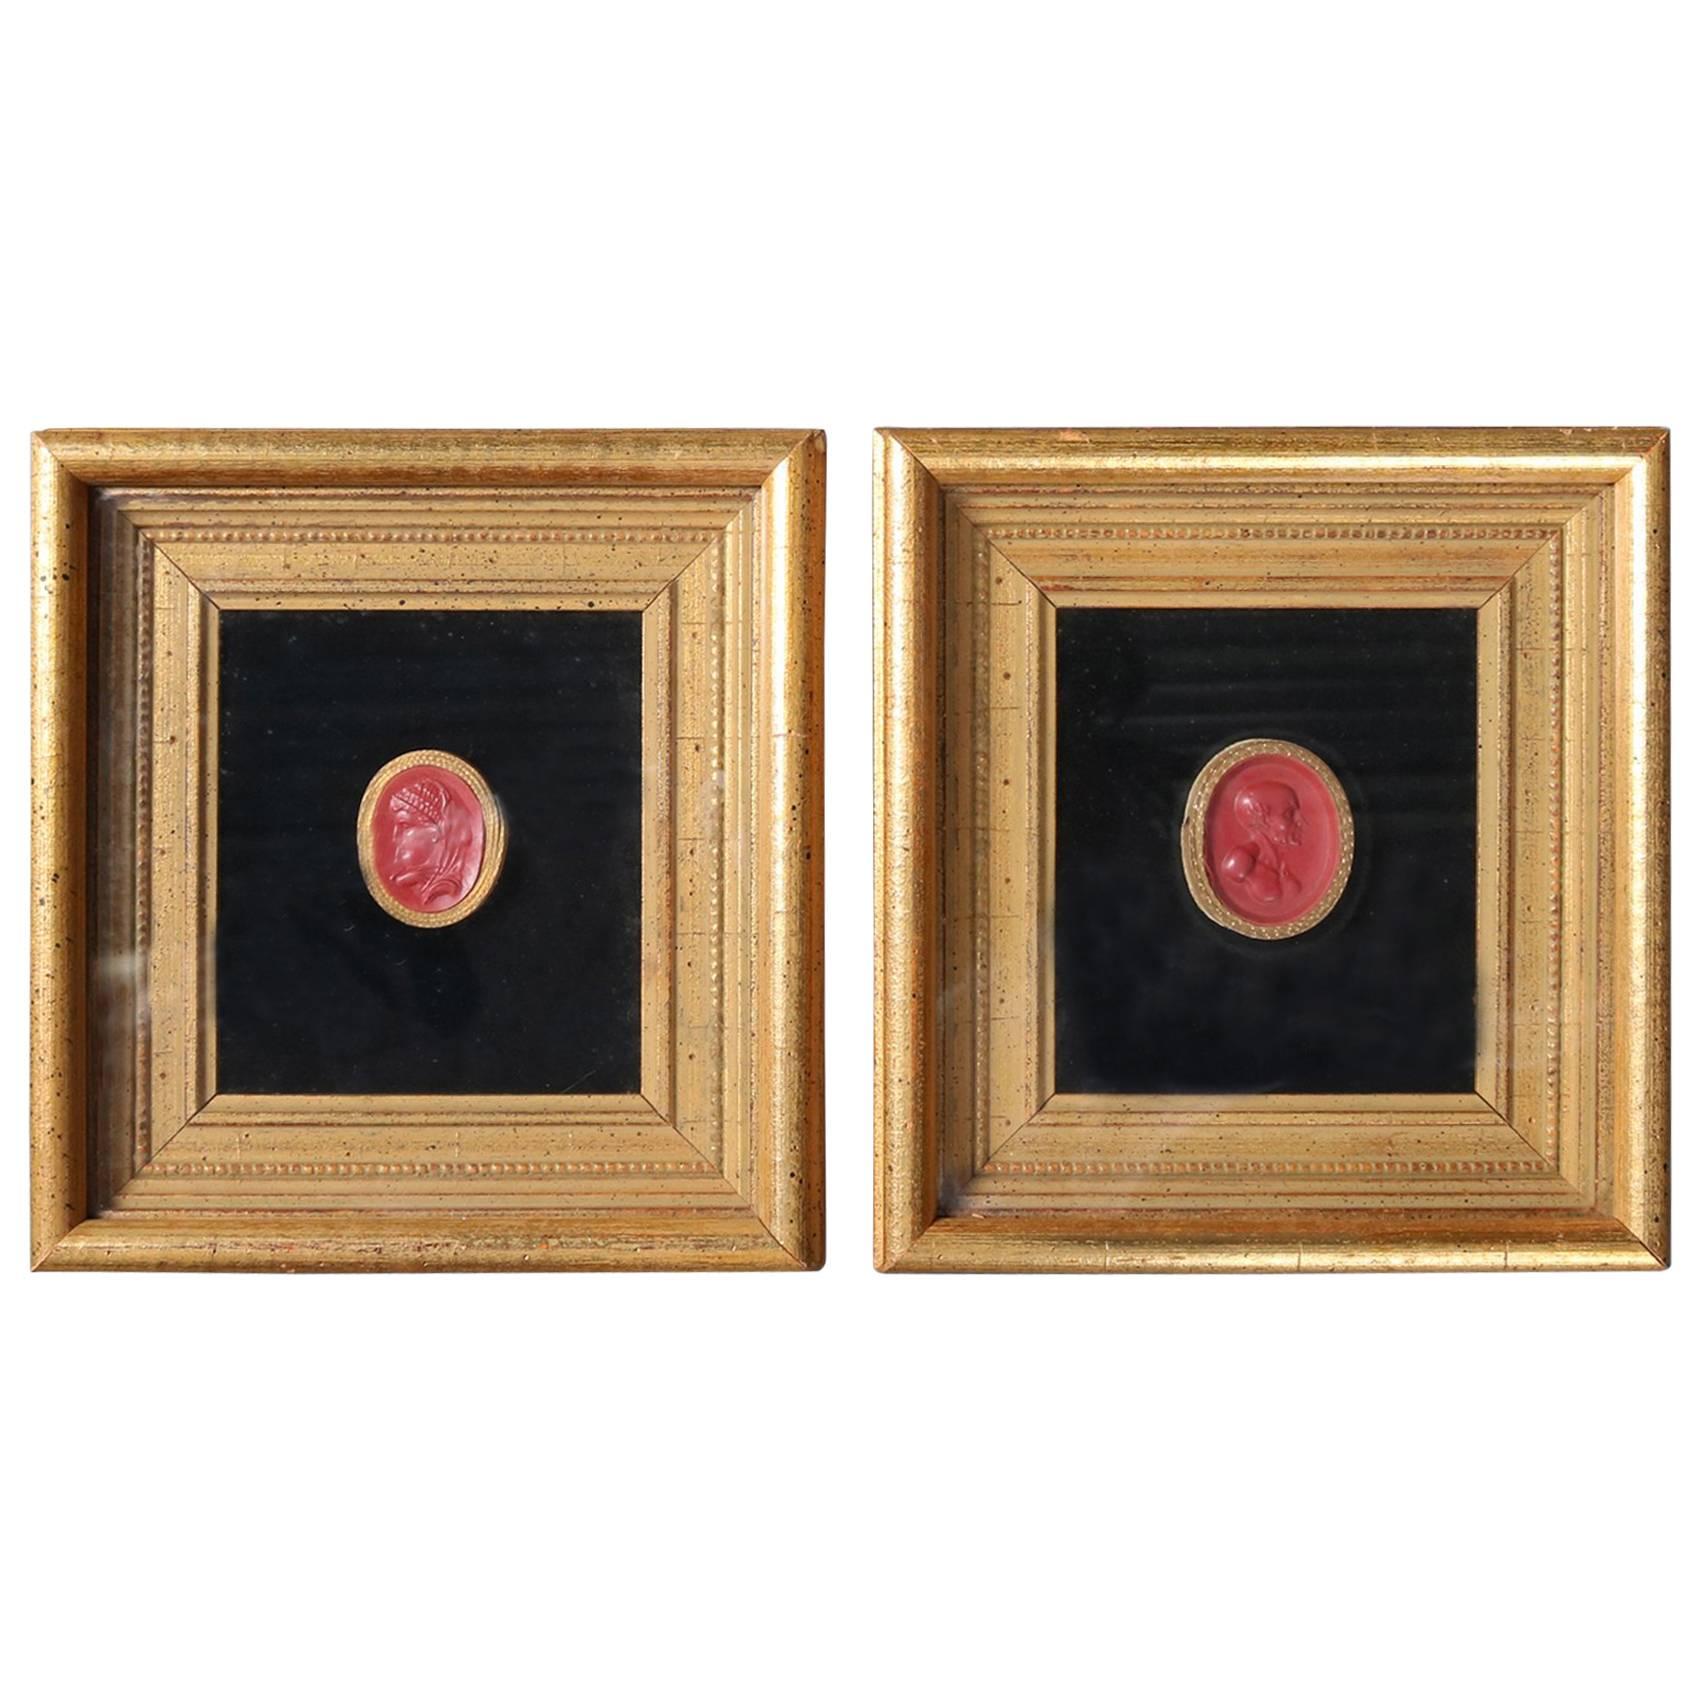 Pair of Miniature Classical Wax Portraits in Giltwood Frames, 19th Century